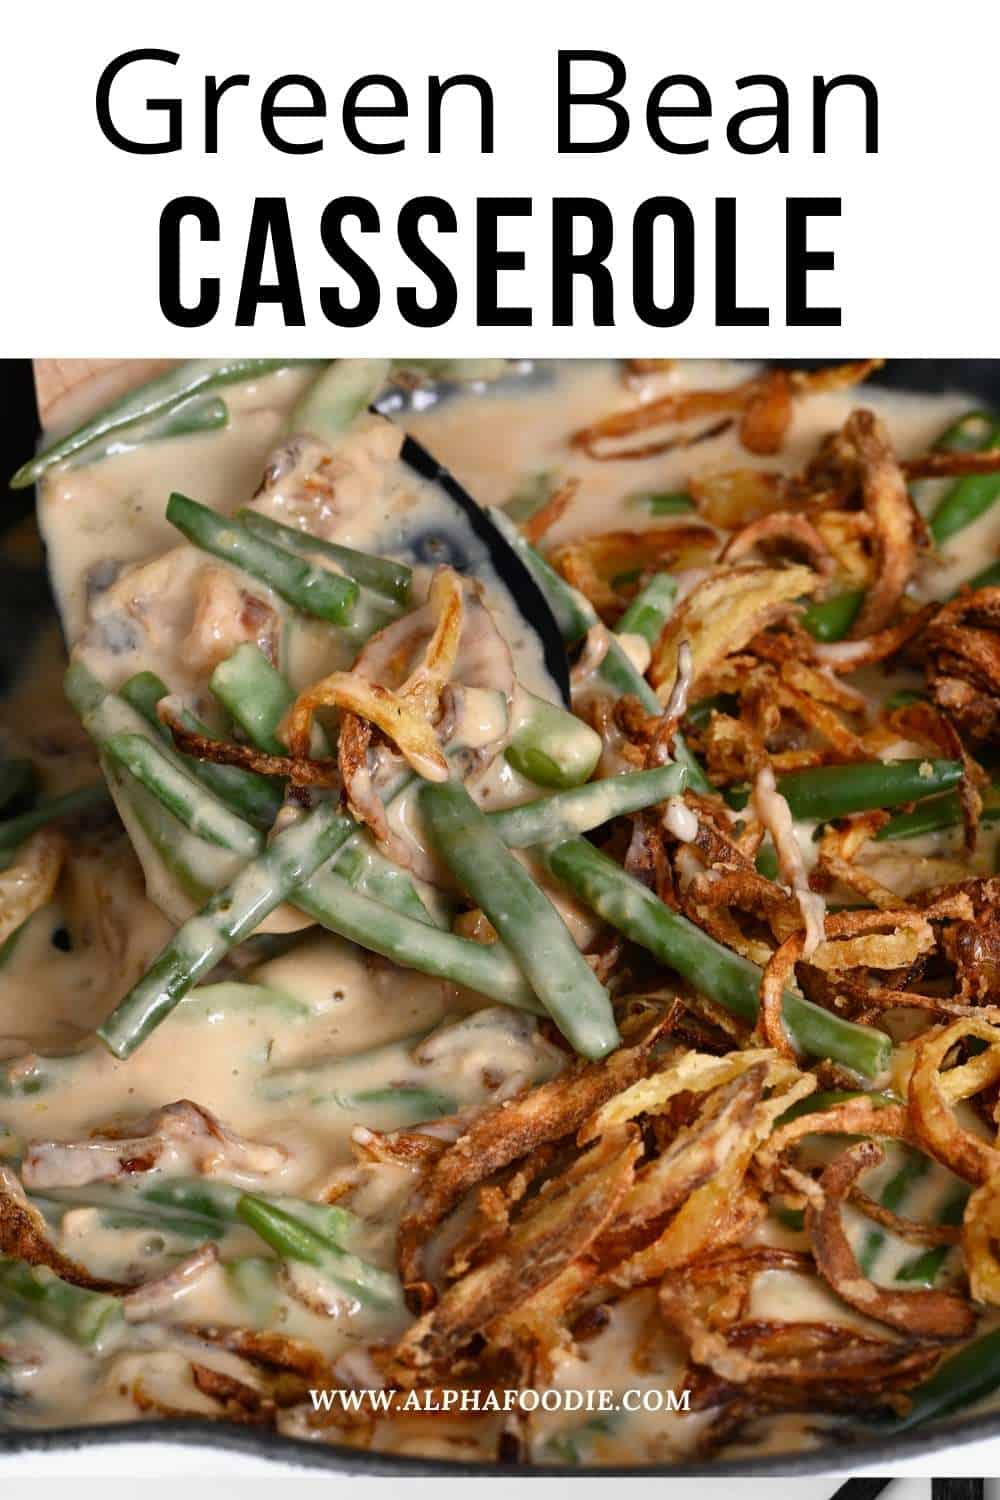 French's Green Bean Casserole from Scratch - Alphafoodie